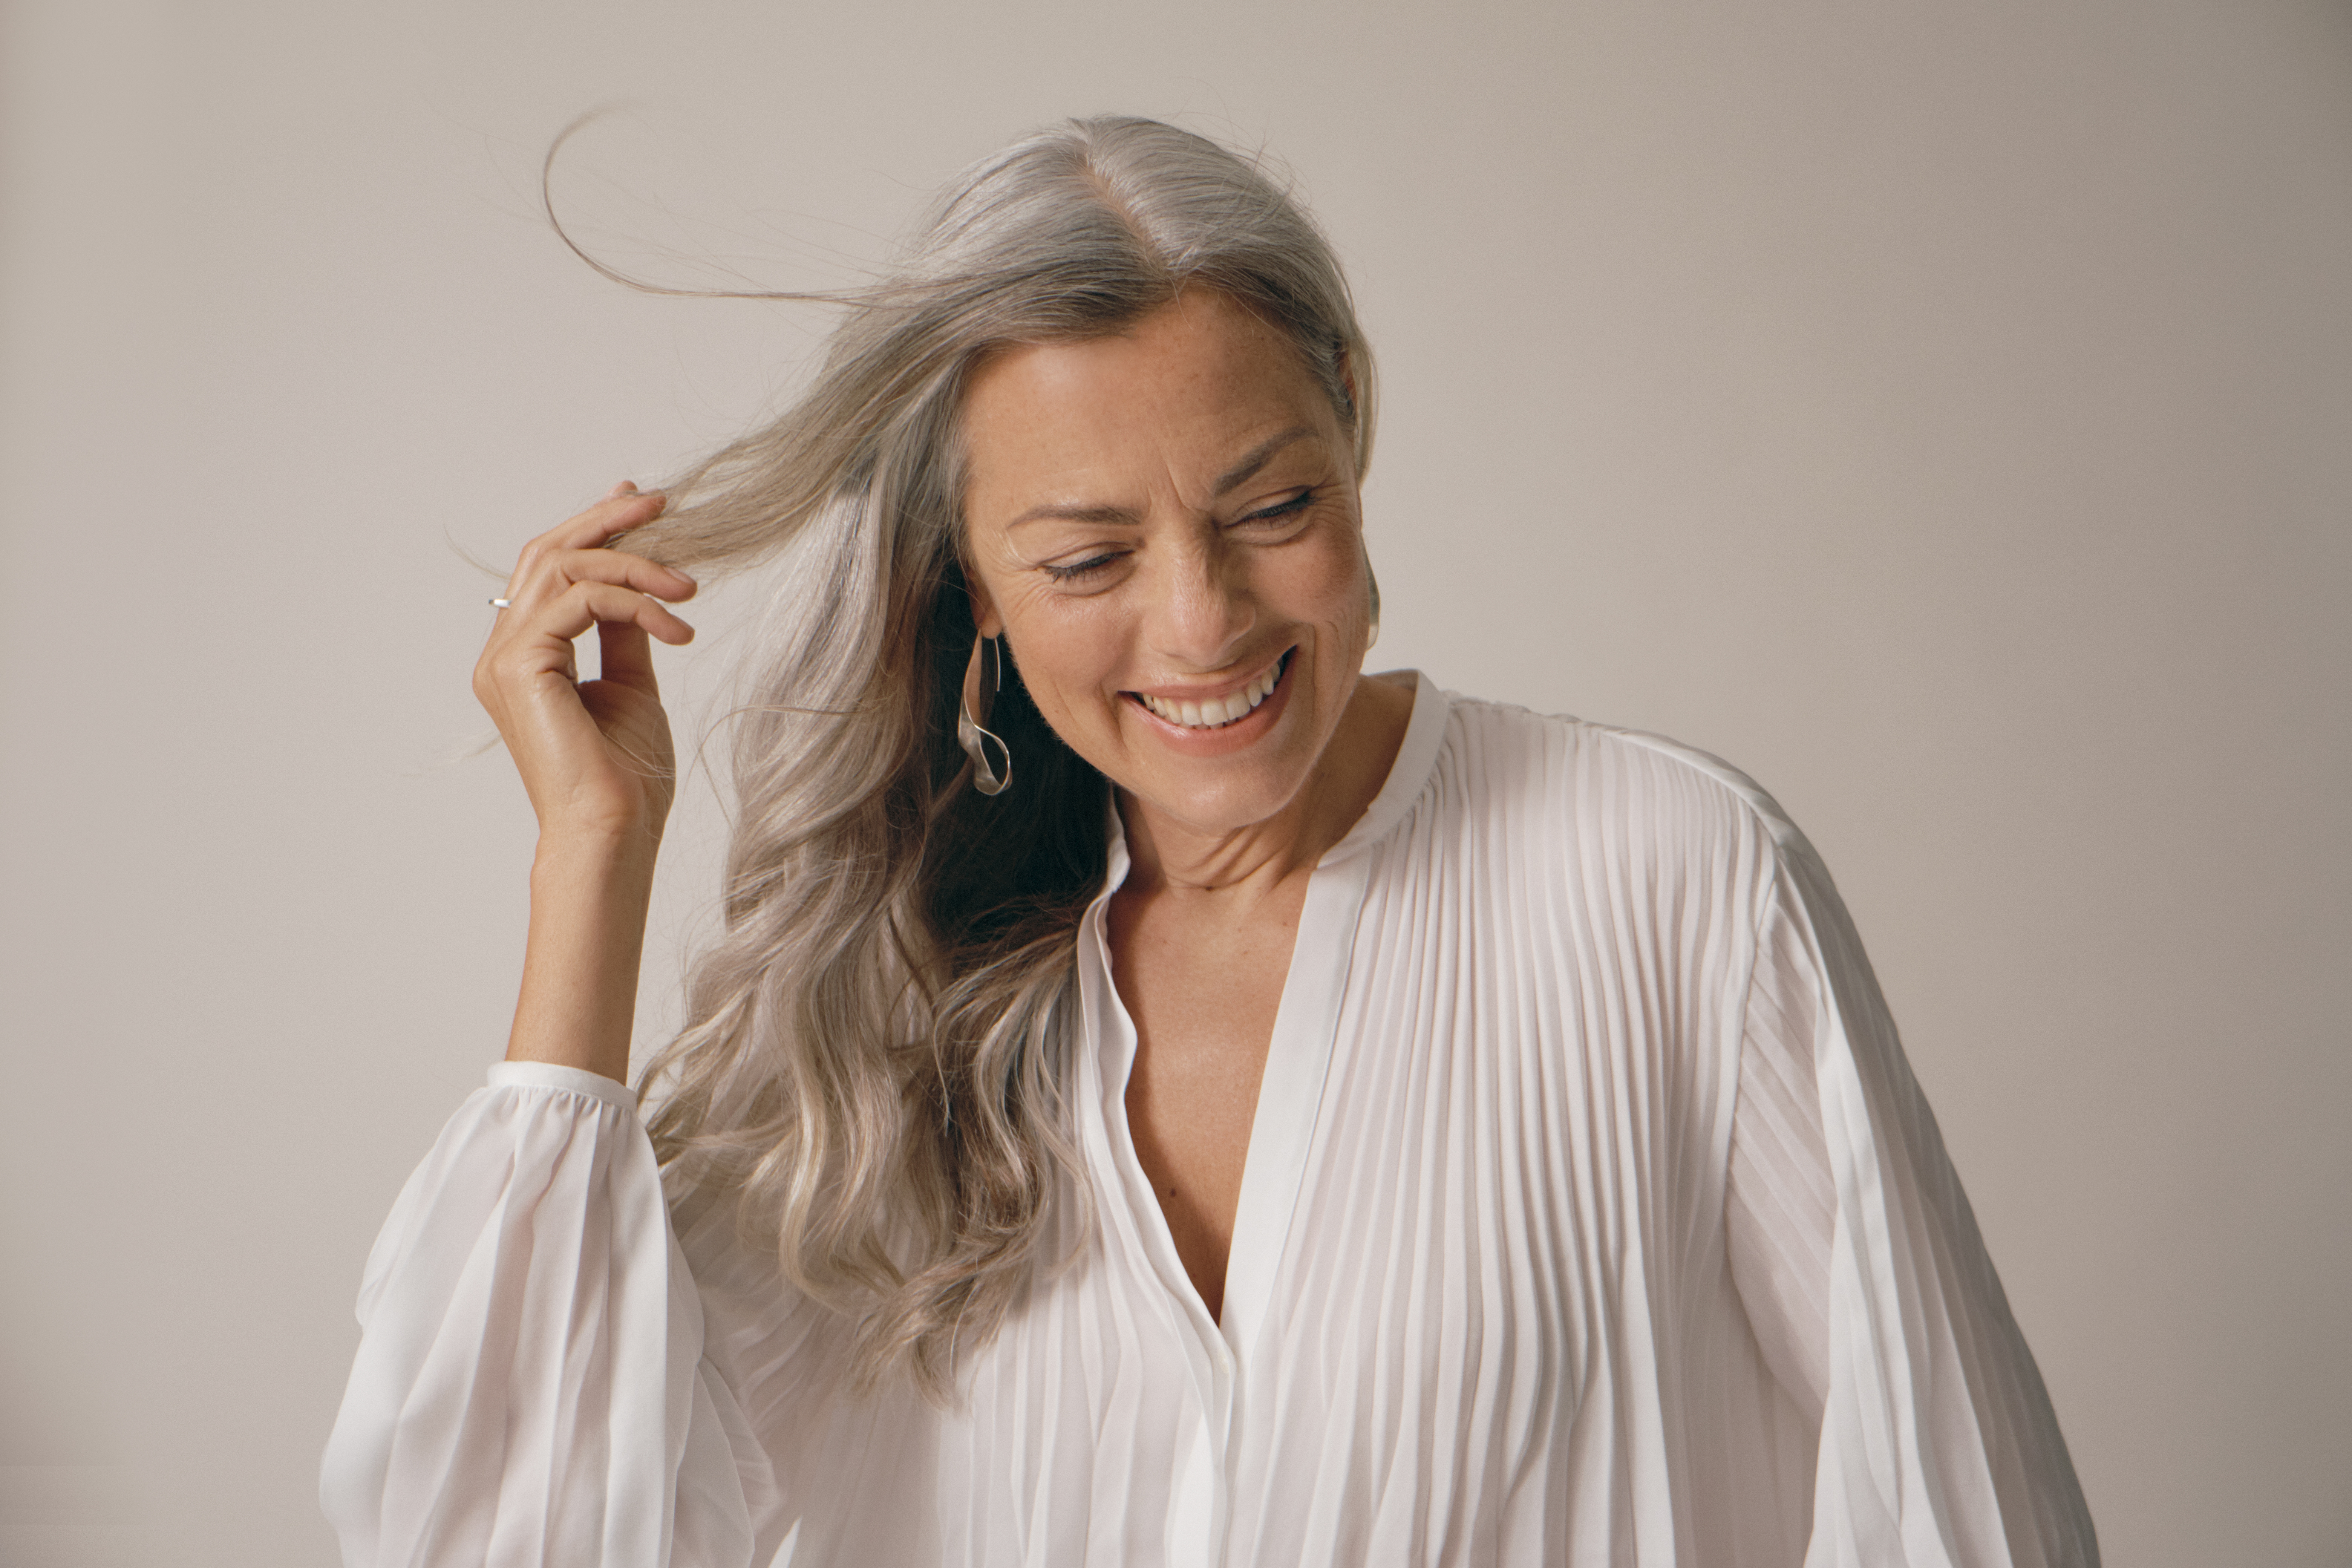 woman with white hair wears a flowing, white blouse and smiles